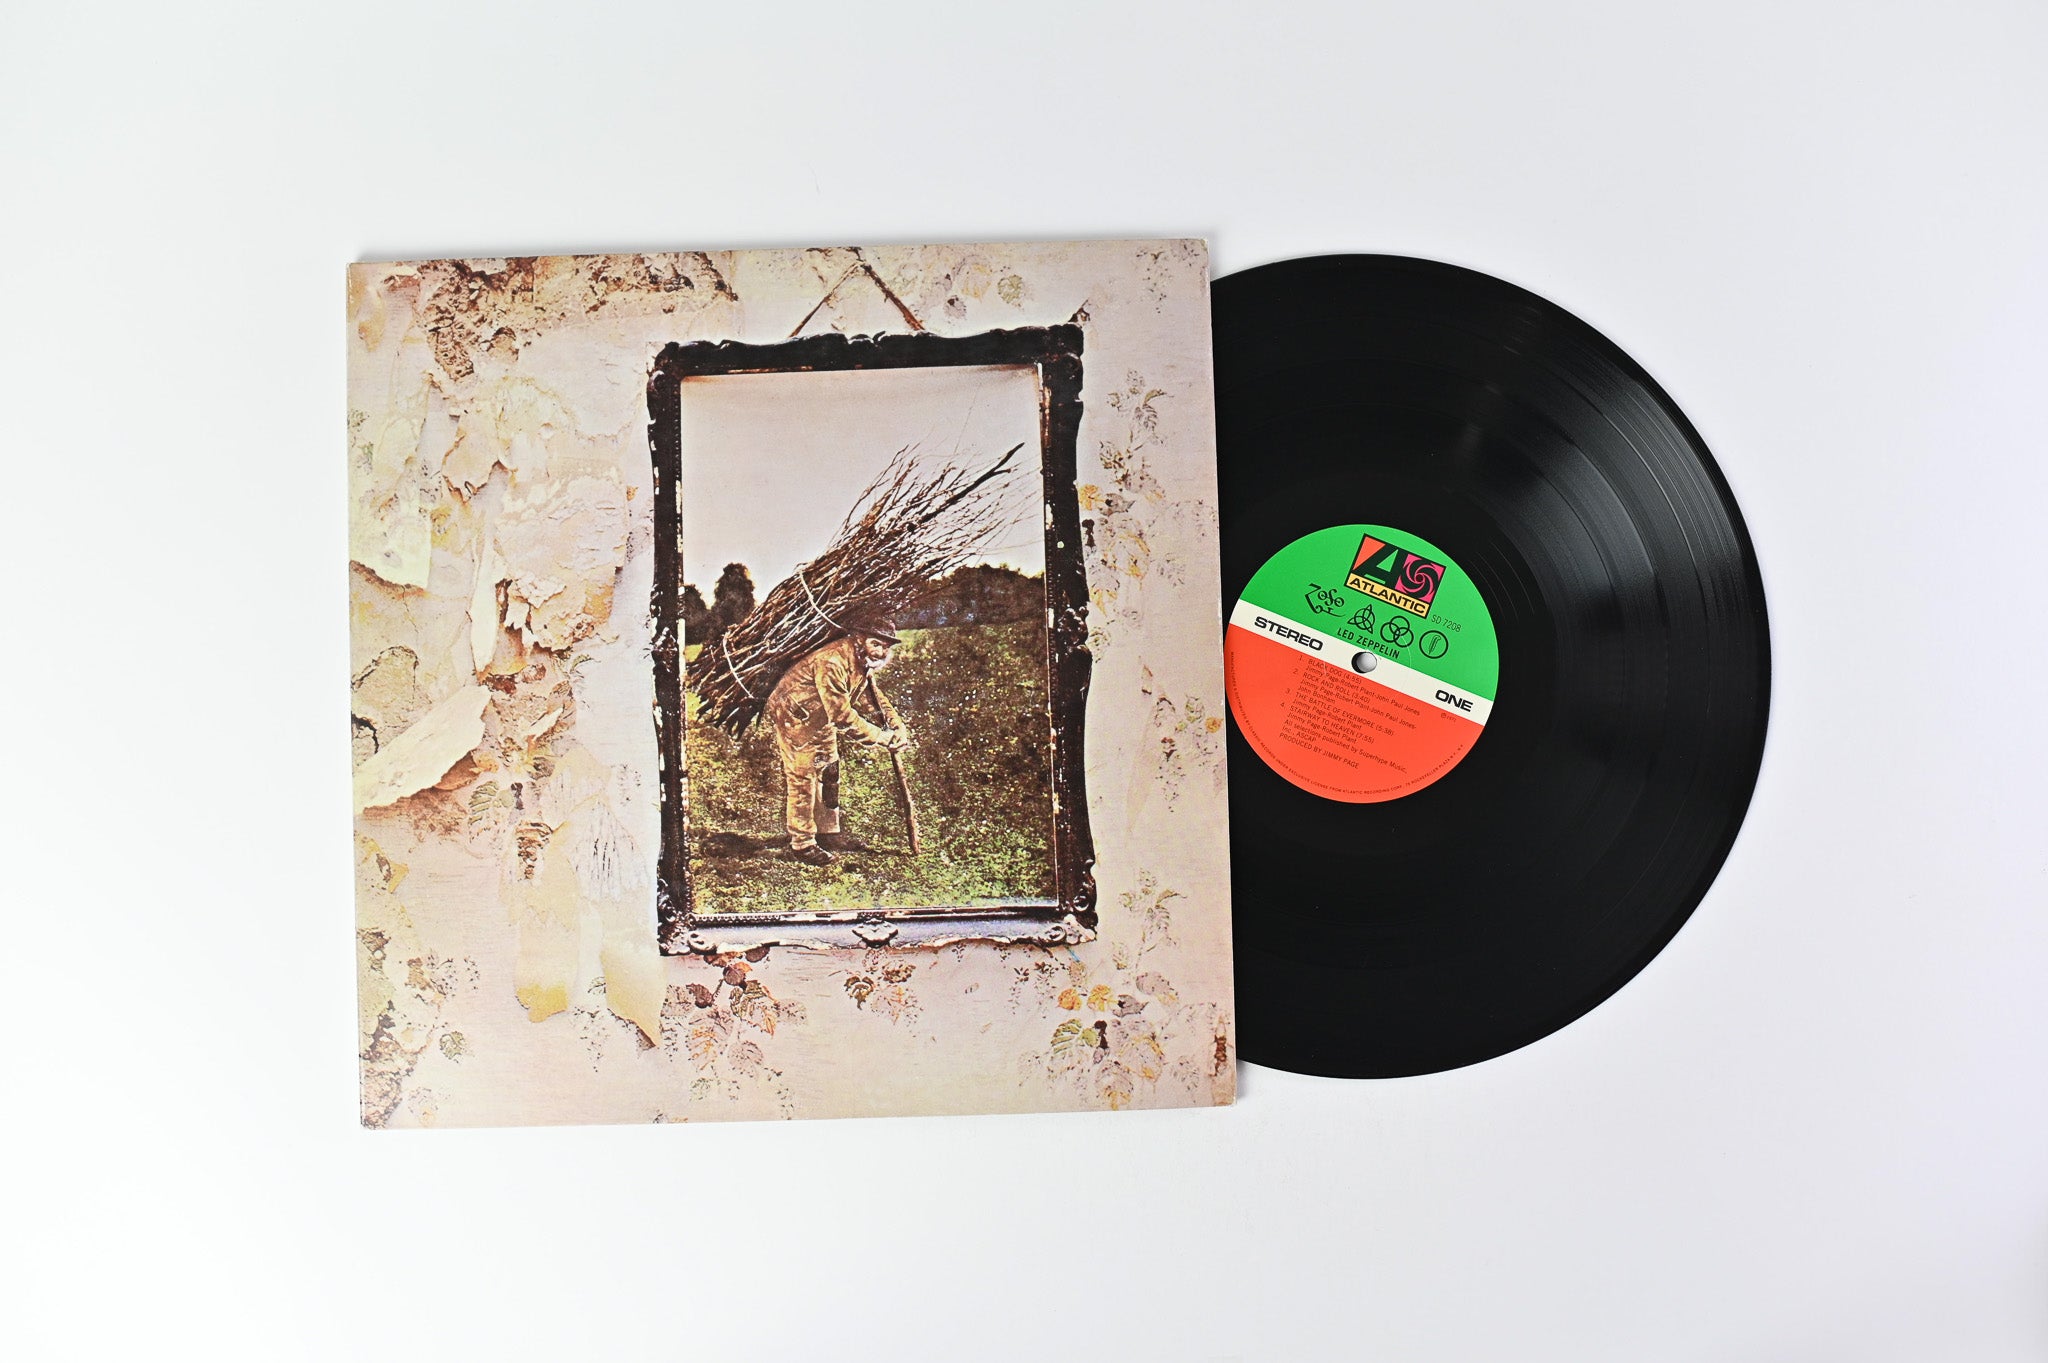 Led Zeppelin - Untitled on Classic Records Reissue